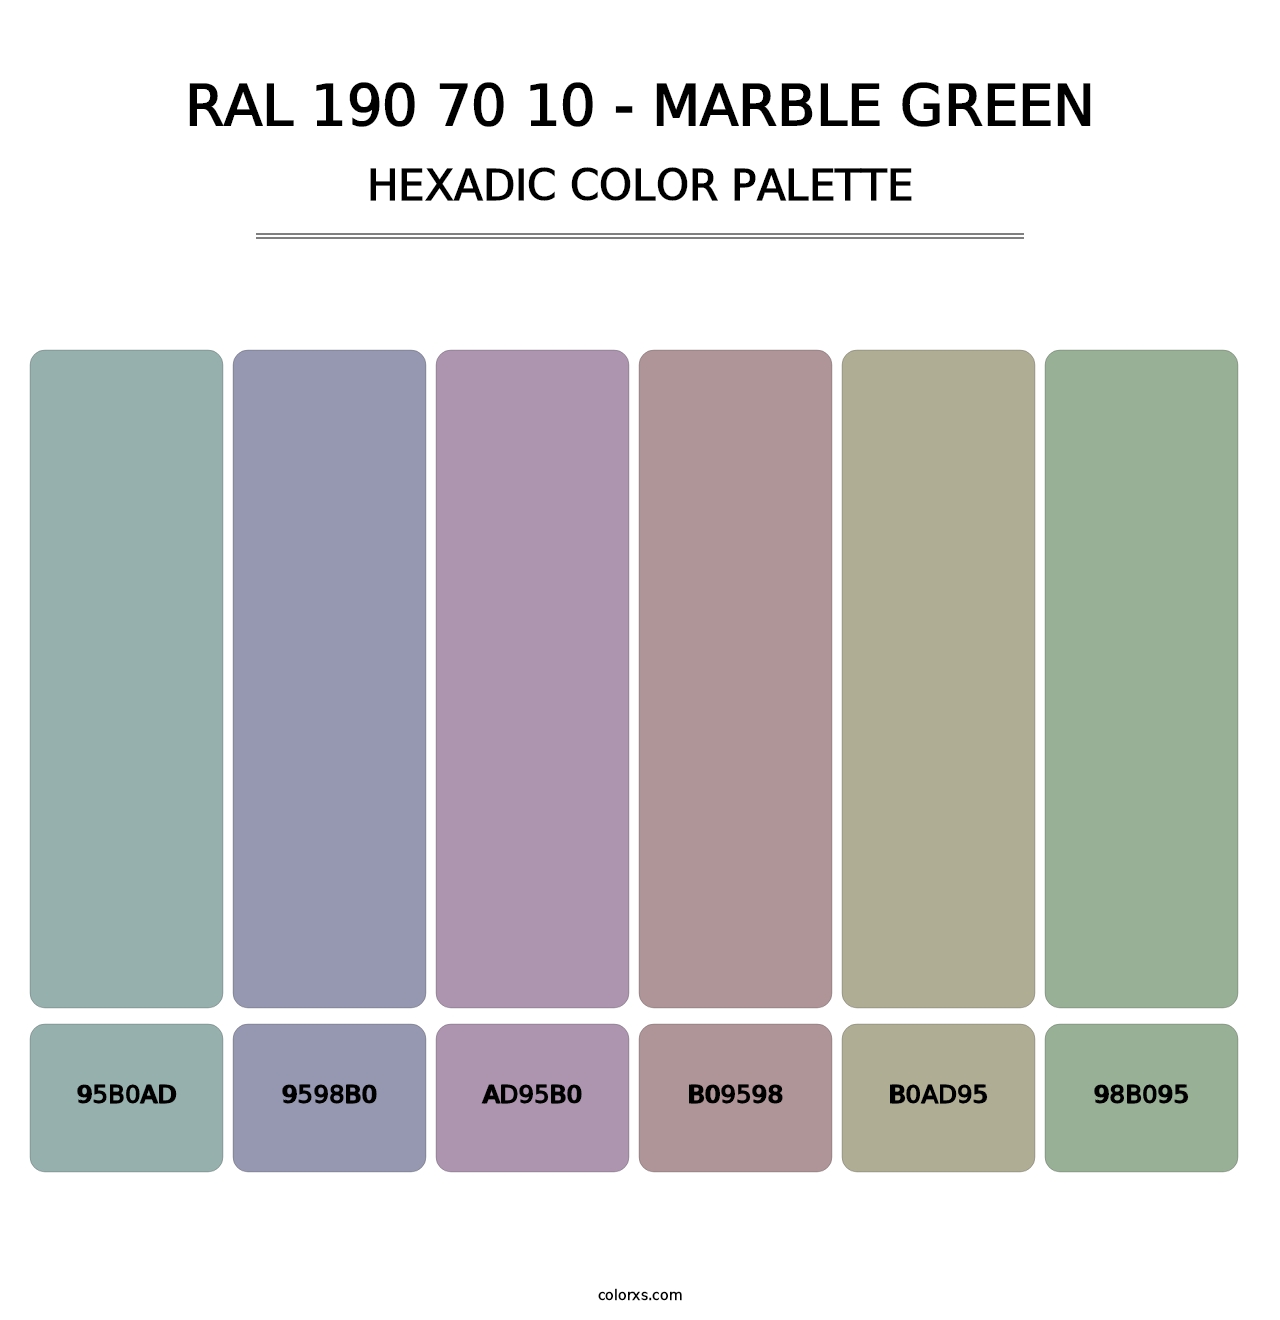 RAL 190 70 10 - Marble Green - Hexadic Color Palette